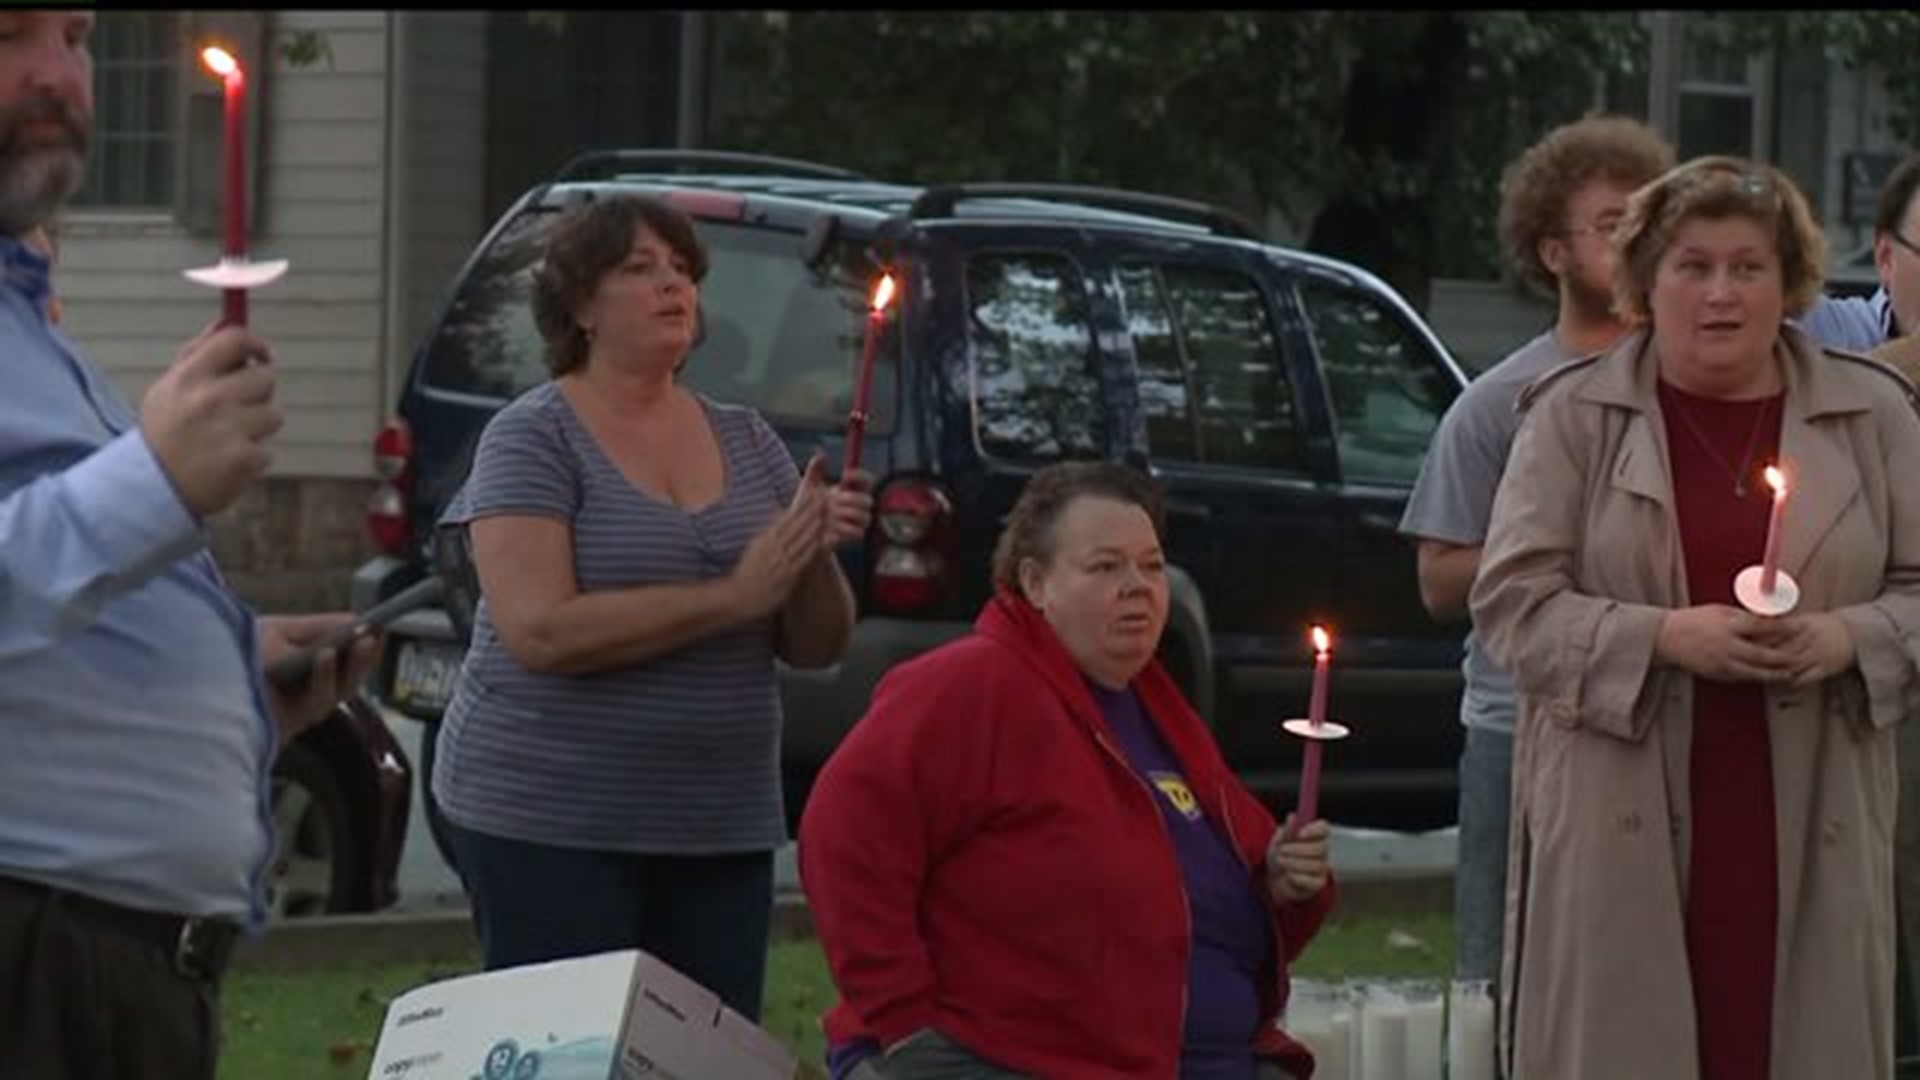 Candlelight vigil in Perry County kicks off Mental Illness Awareness Week